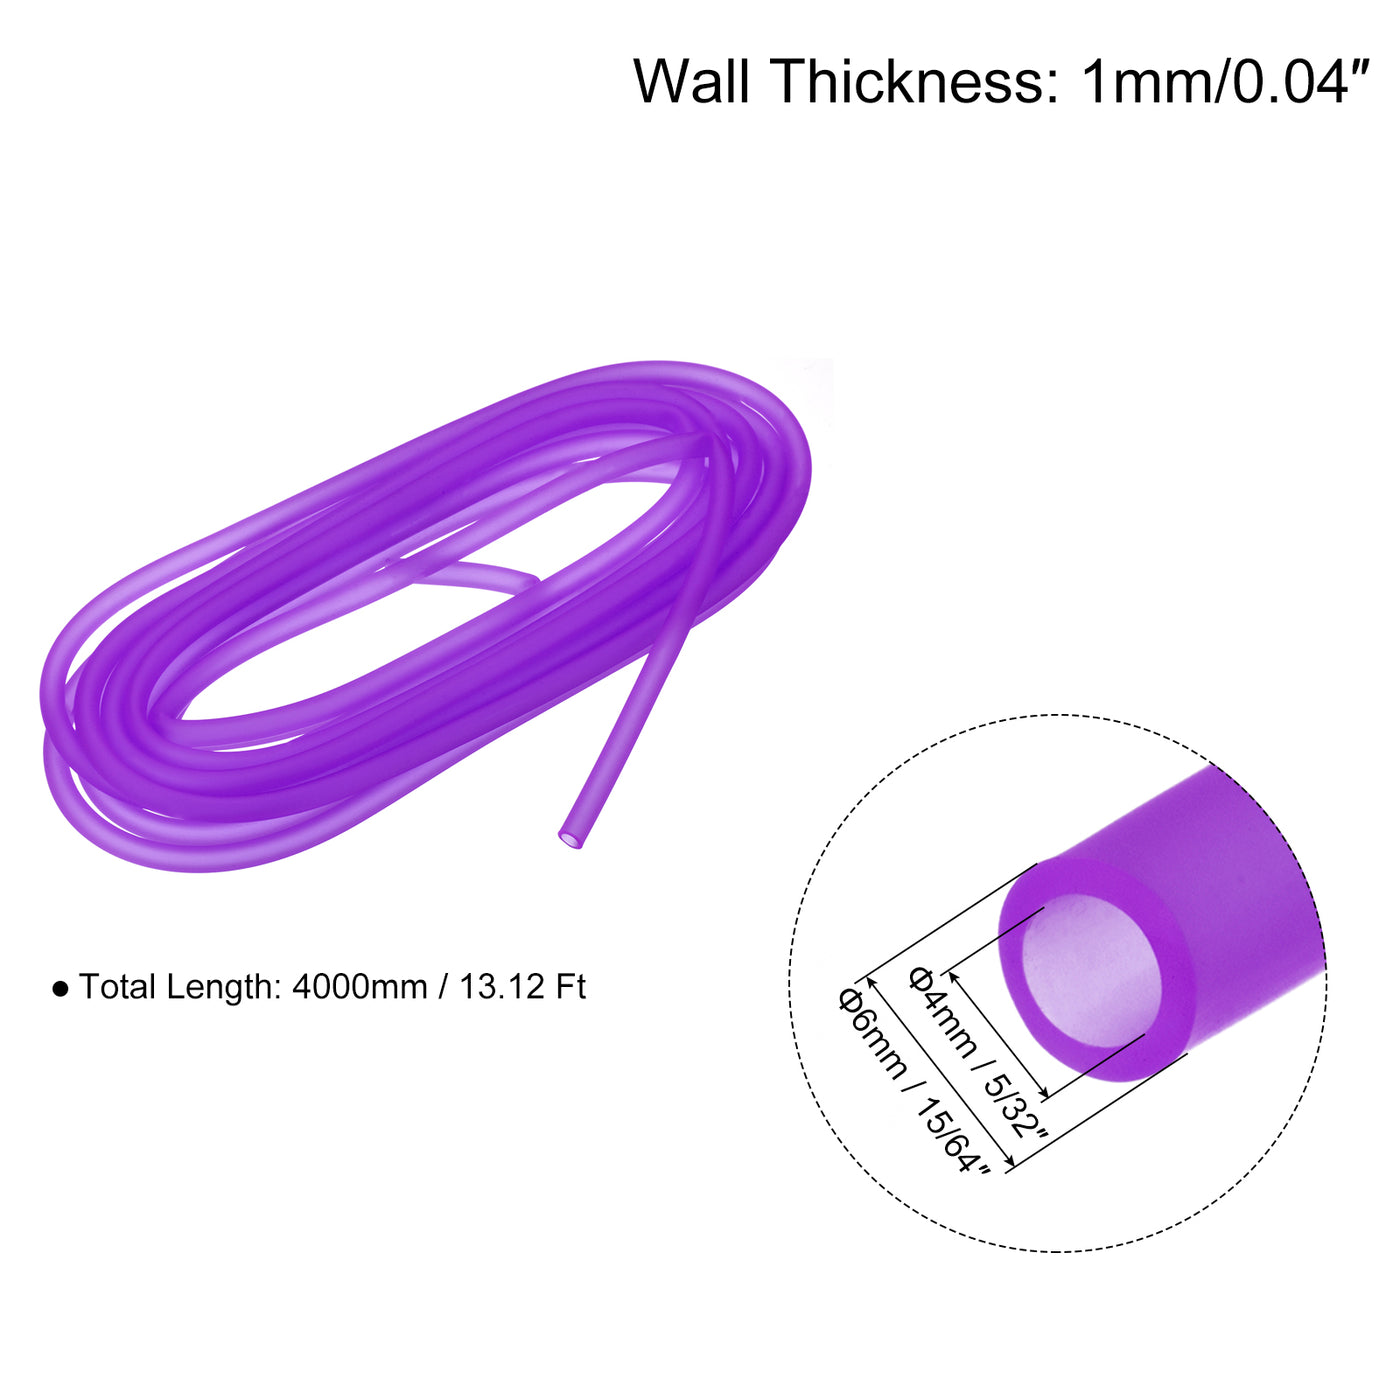 uxcell Uxcell Silicone Tubing 5/32" ID, 15/64" OD 4Pcs 13.12 Ft for Pump Transfer, Purple